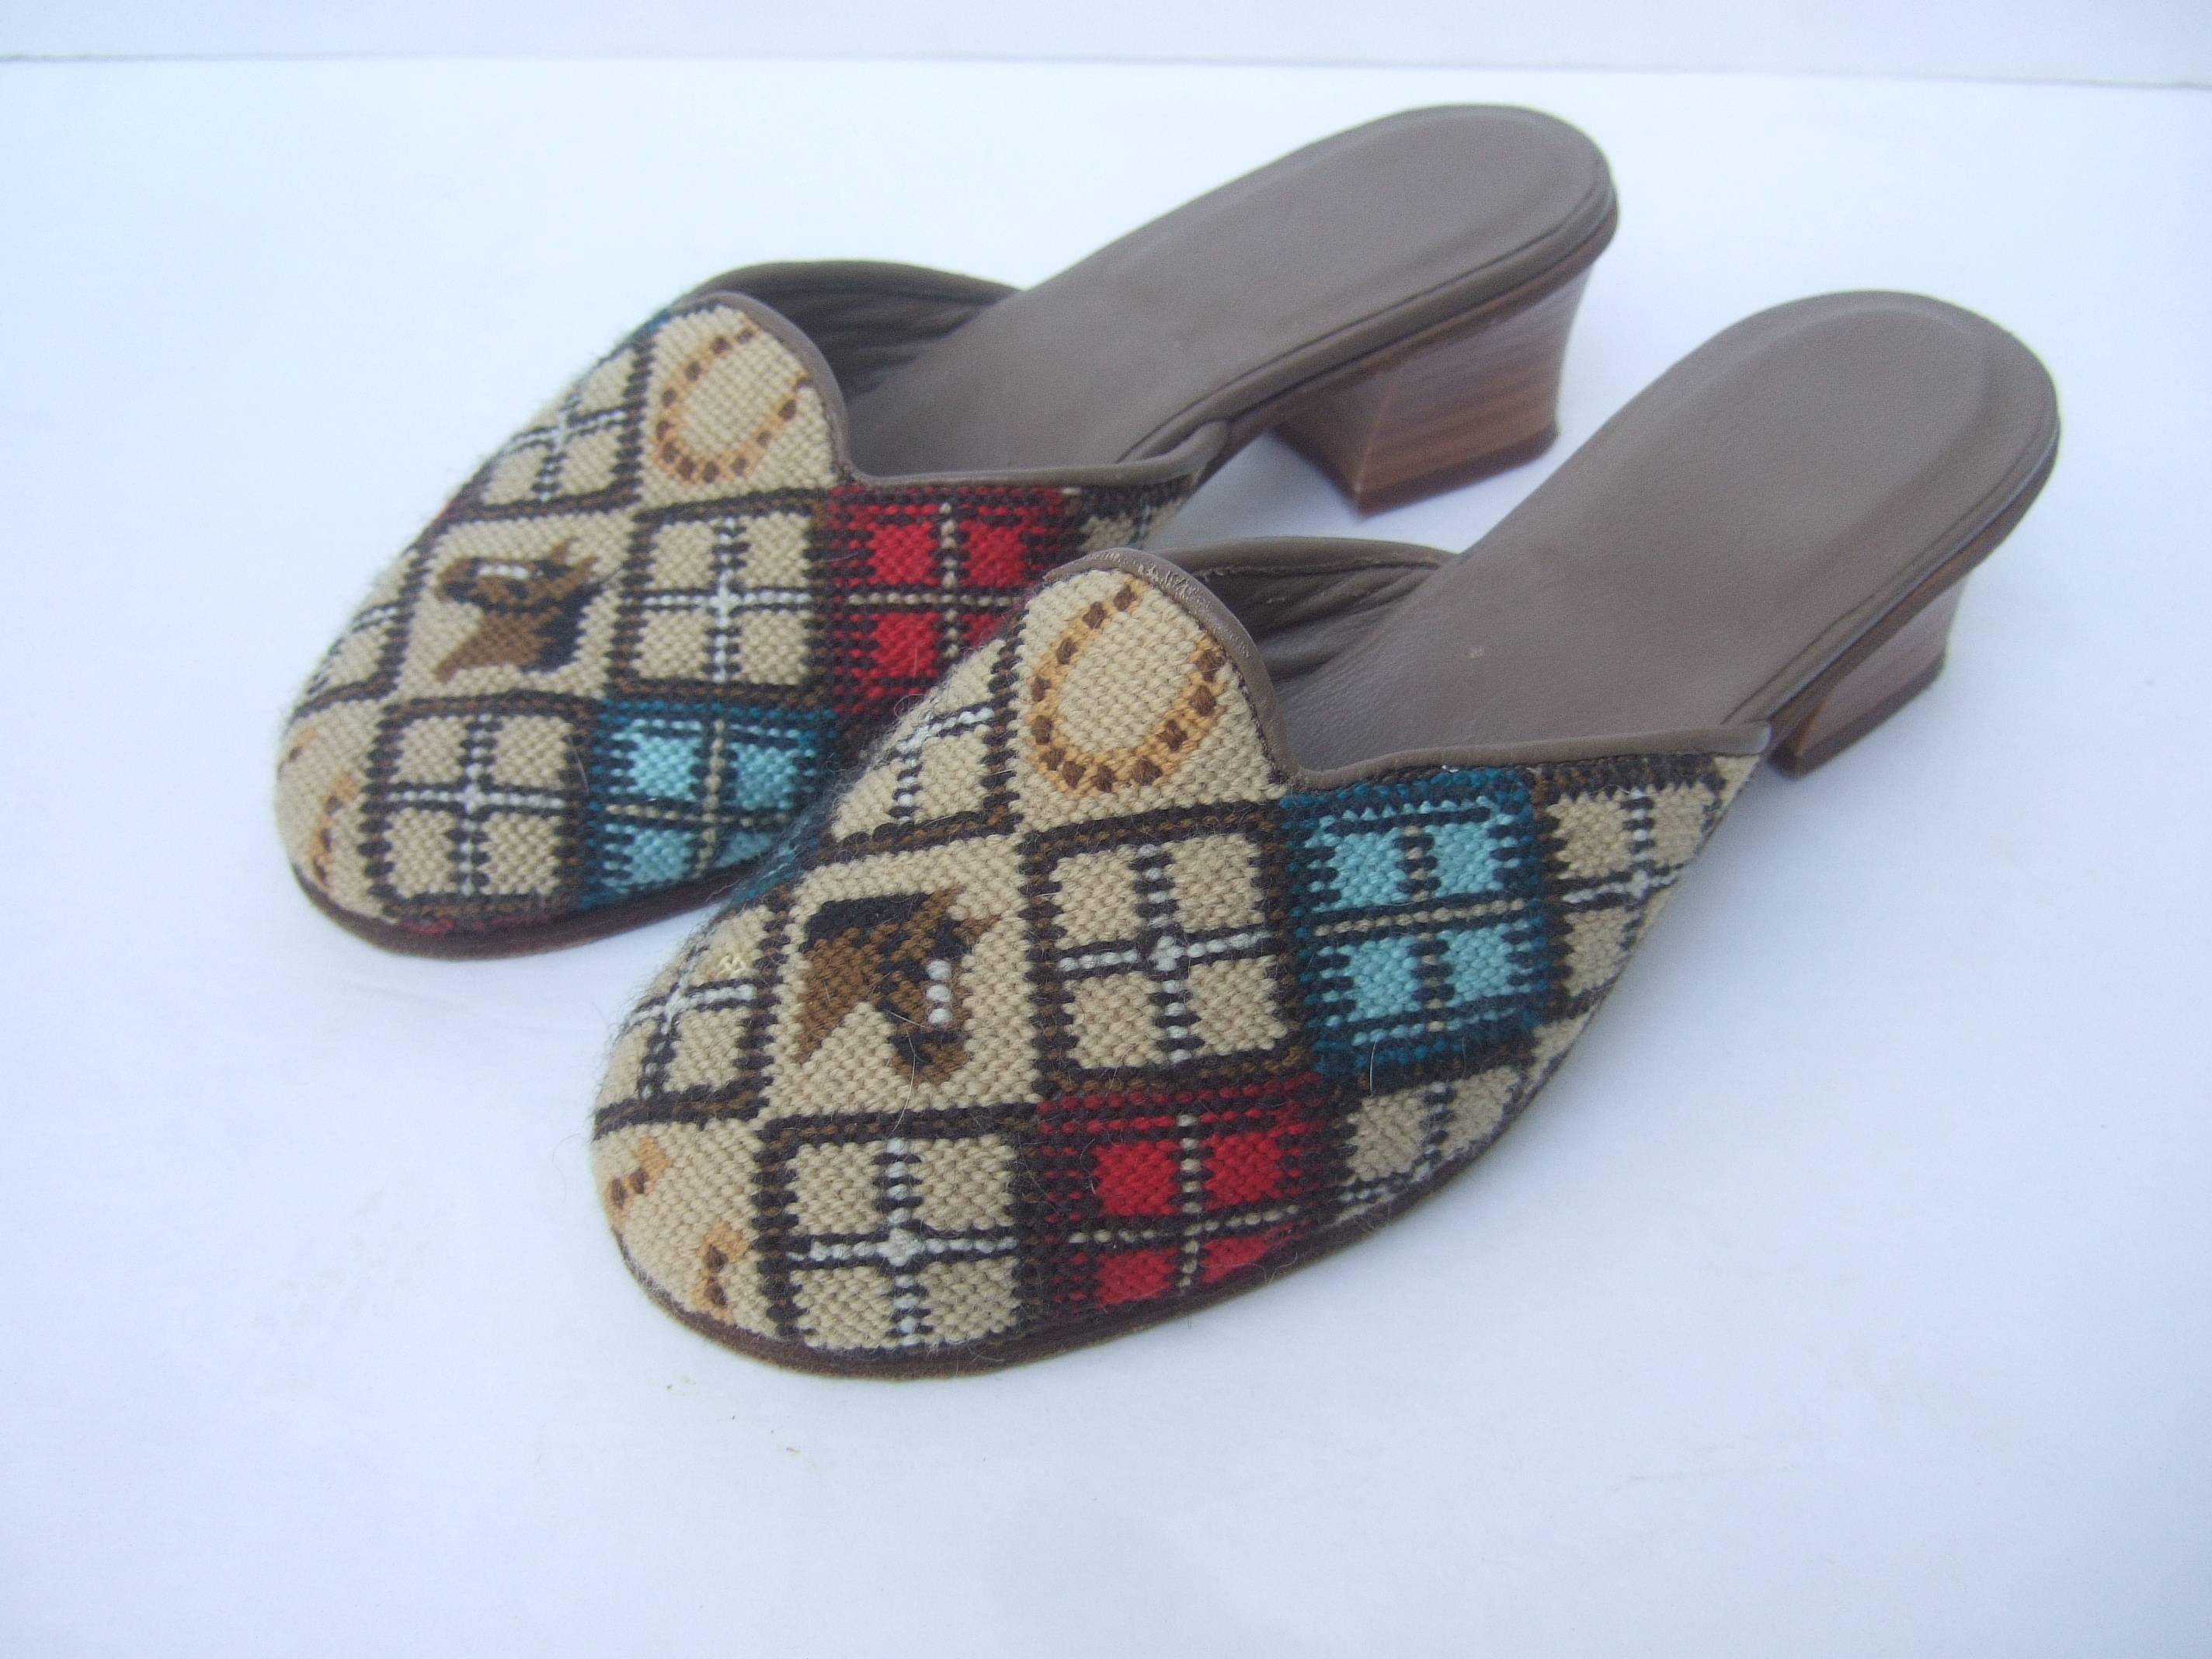 Women's Charming Needlepoint Equine Slipper Shoes Made in Italy c 1980